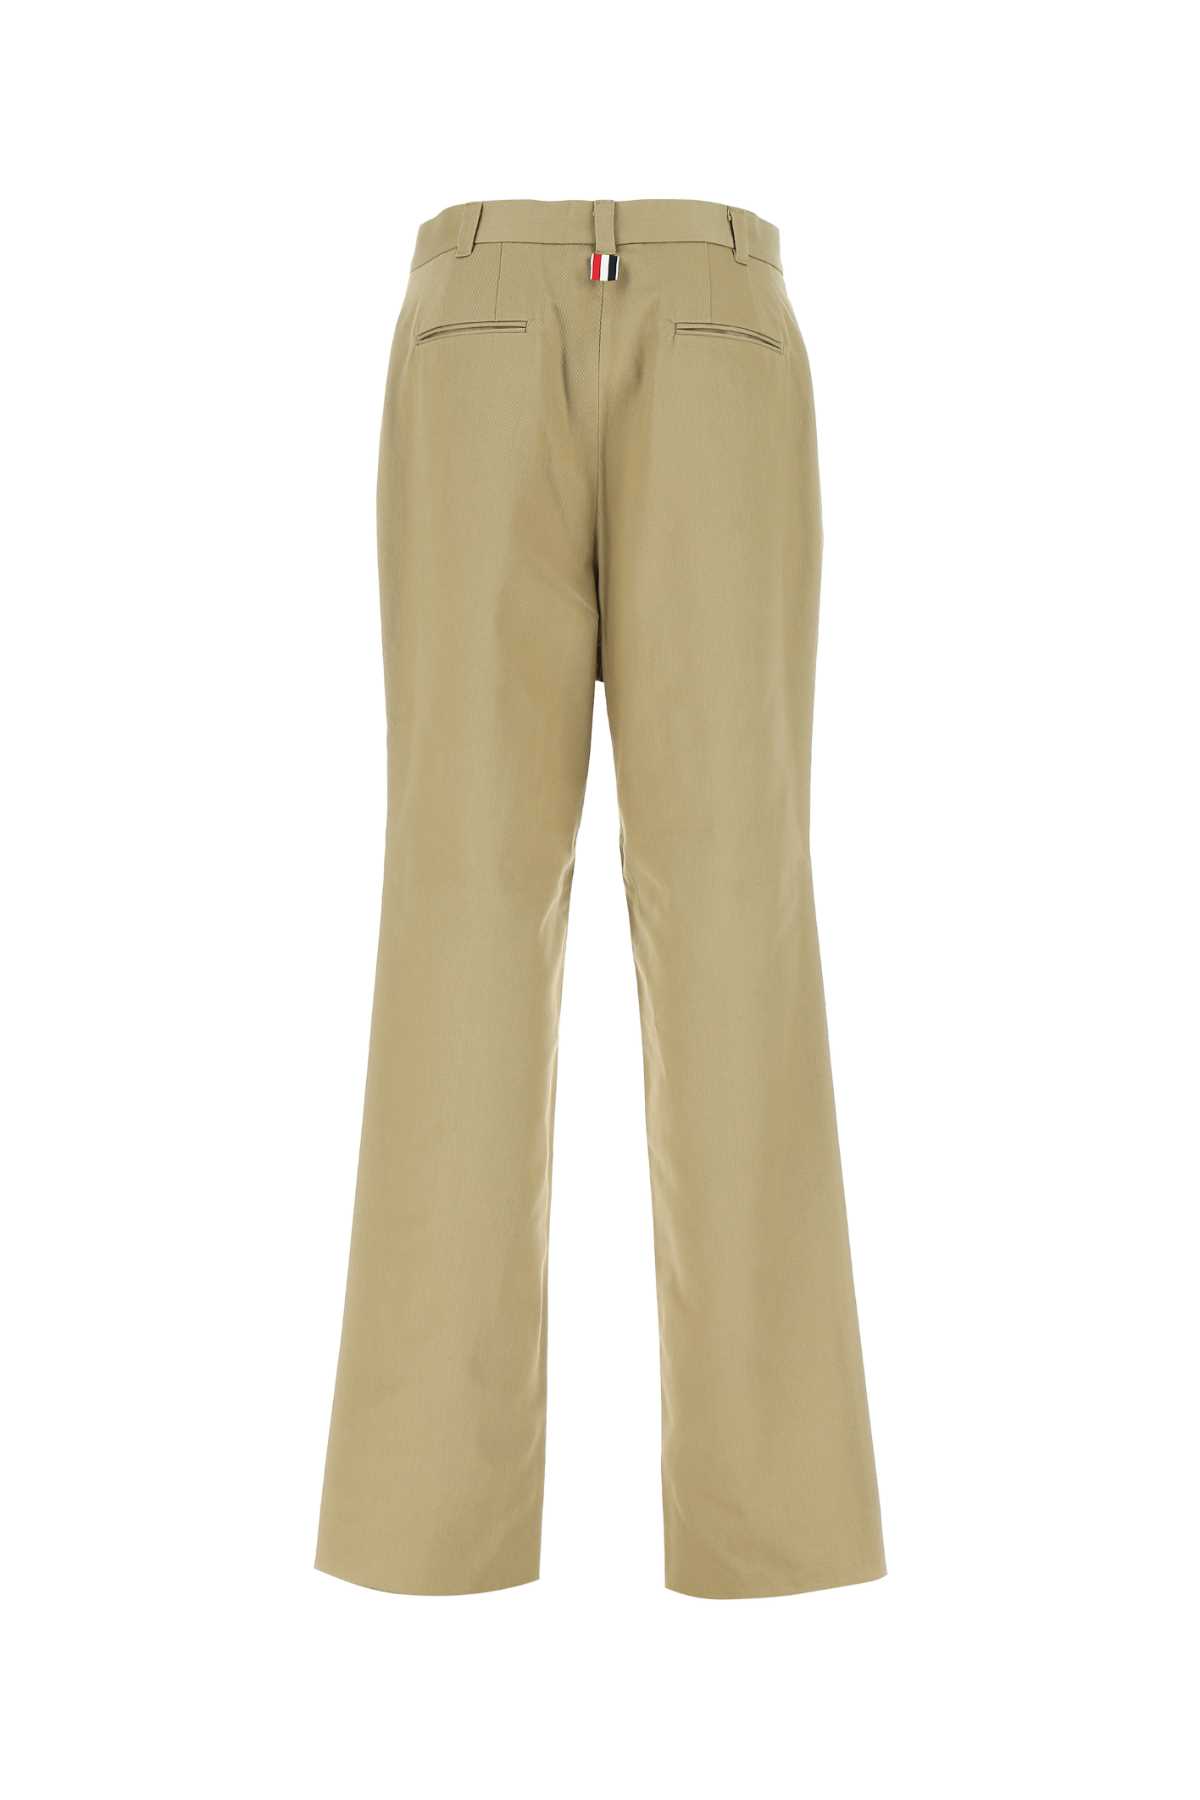 Thom Browne Cappuccino Cotton Pant In 280